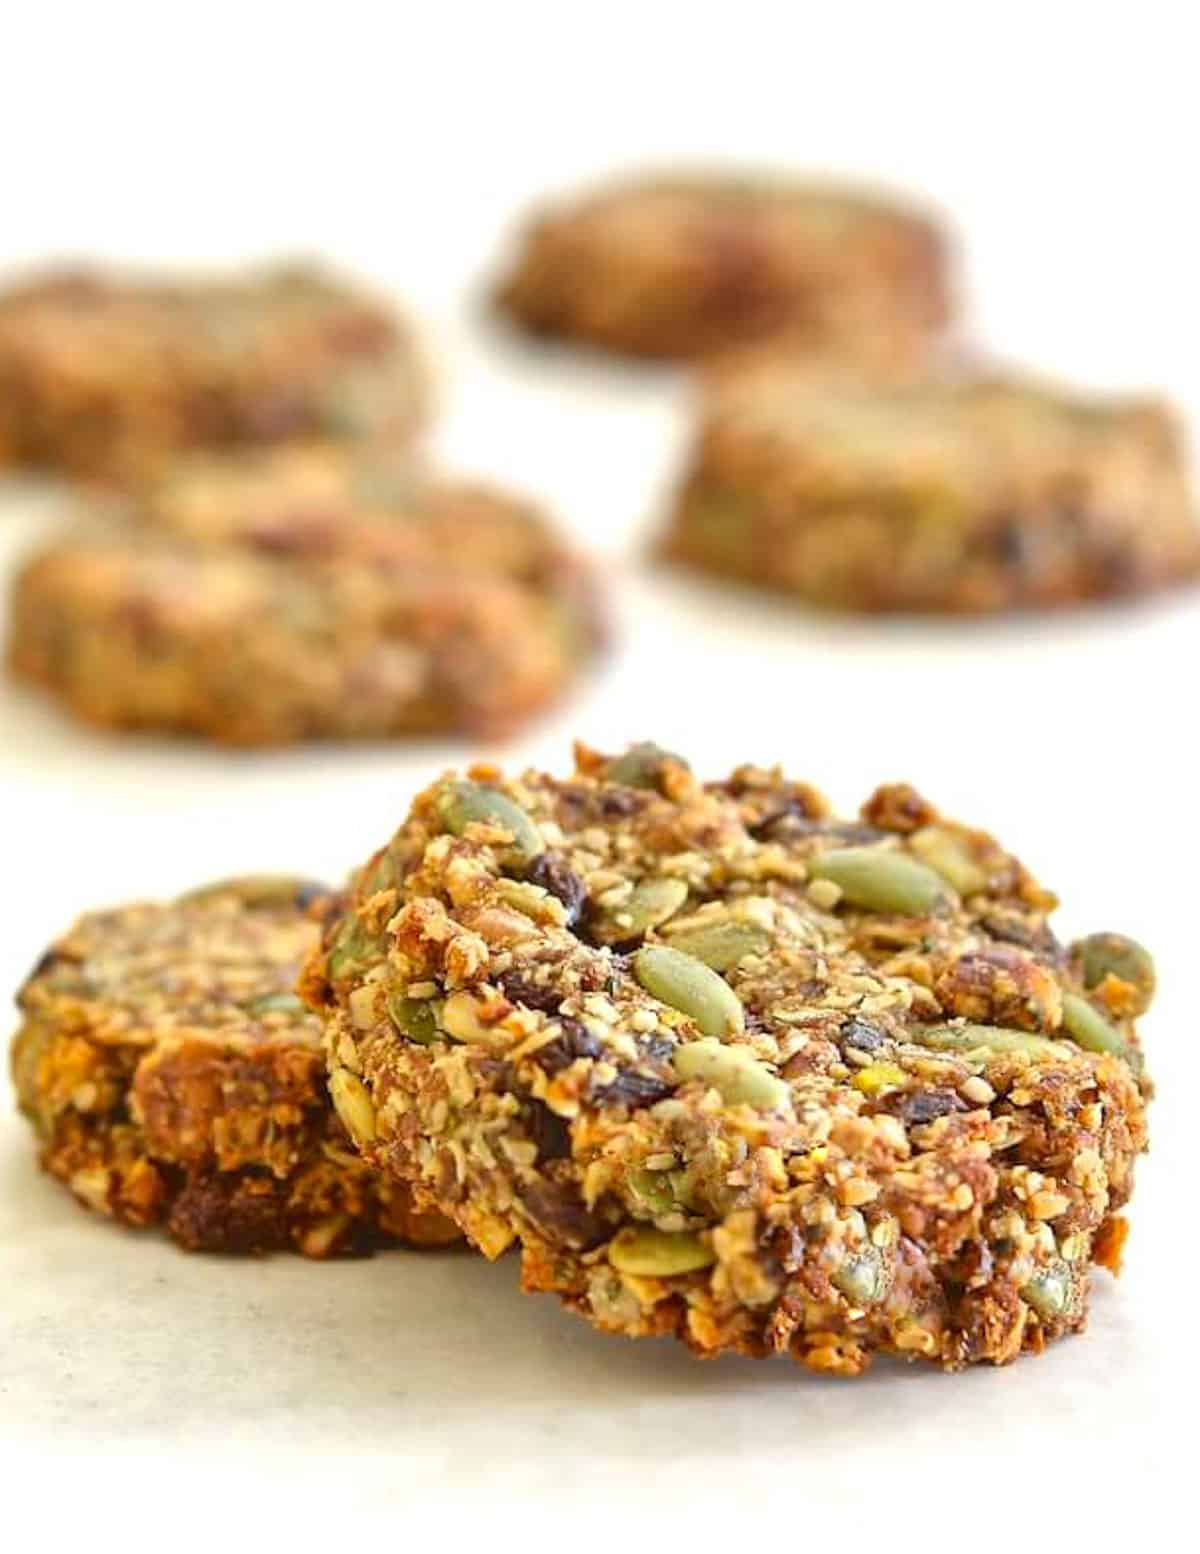 These Super Seedy Power Cookies are super seedy, super nutty & super healthy. They are naturally sweetened & contain no grains or gluten. Perfect for on the go breakfasts or snacks!